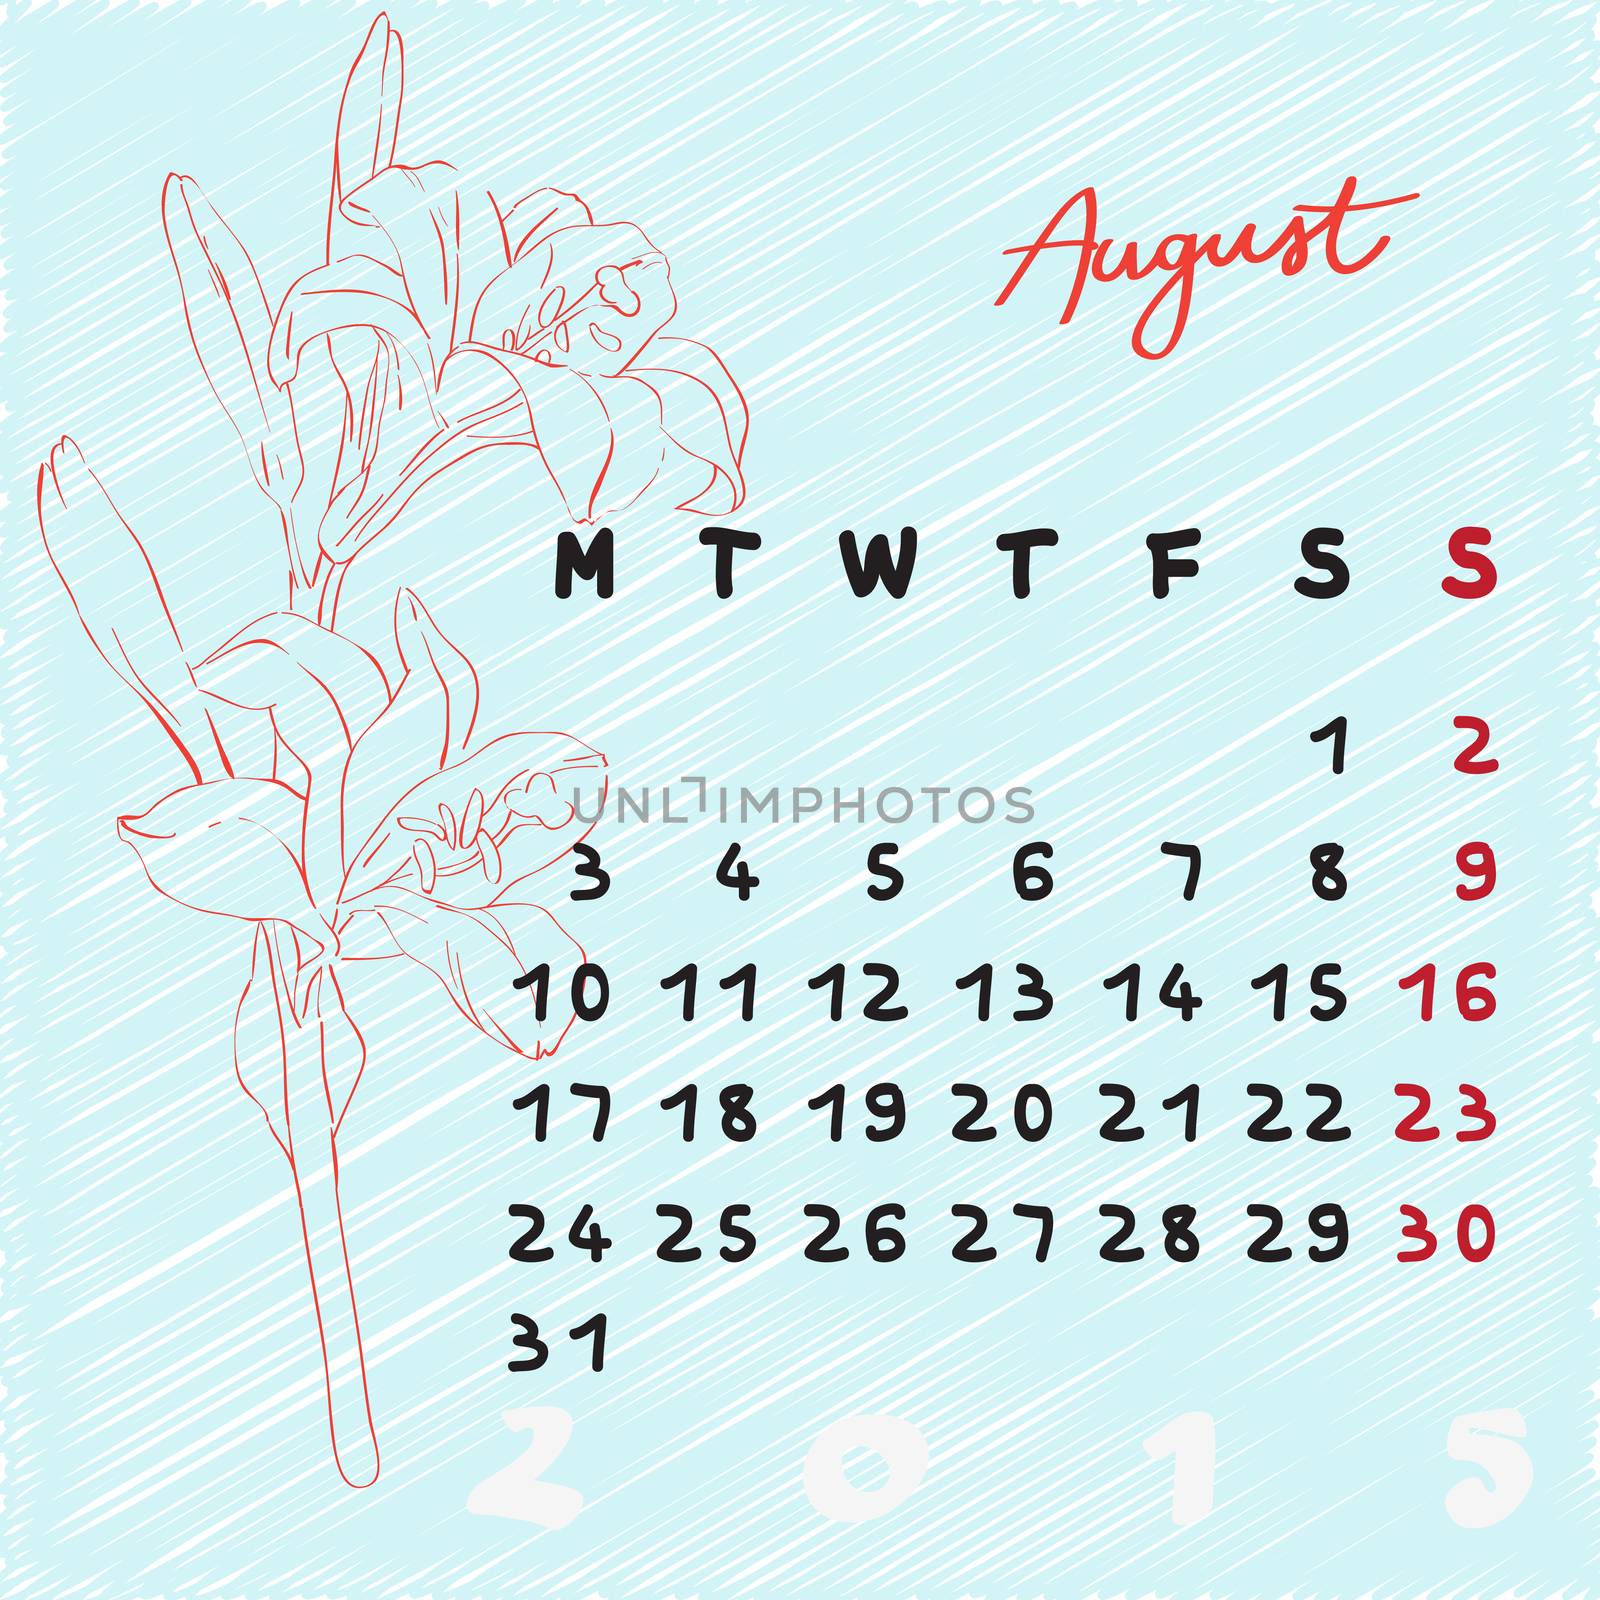 august 2015 flowers by catacos